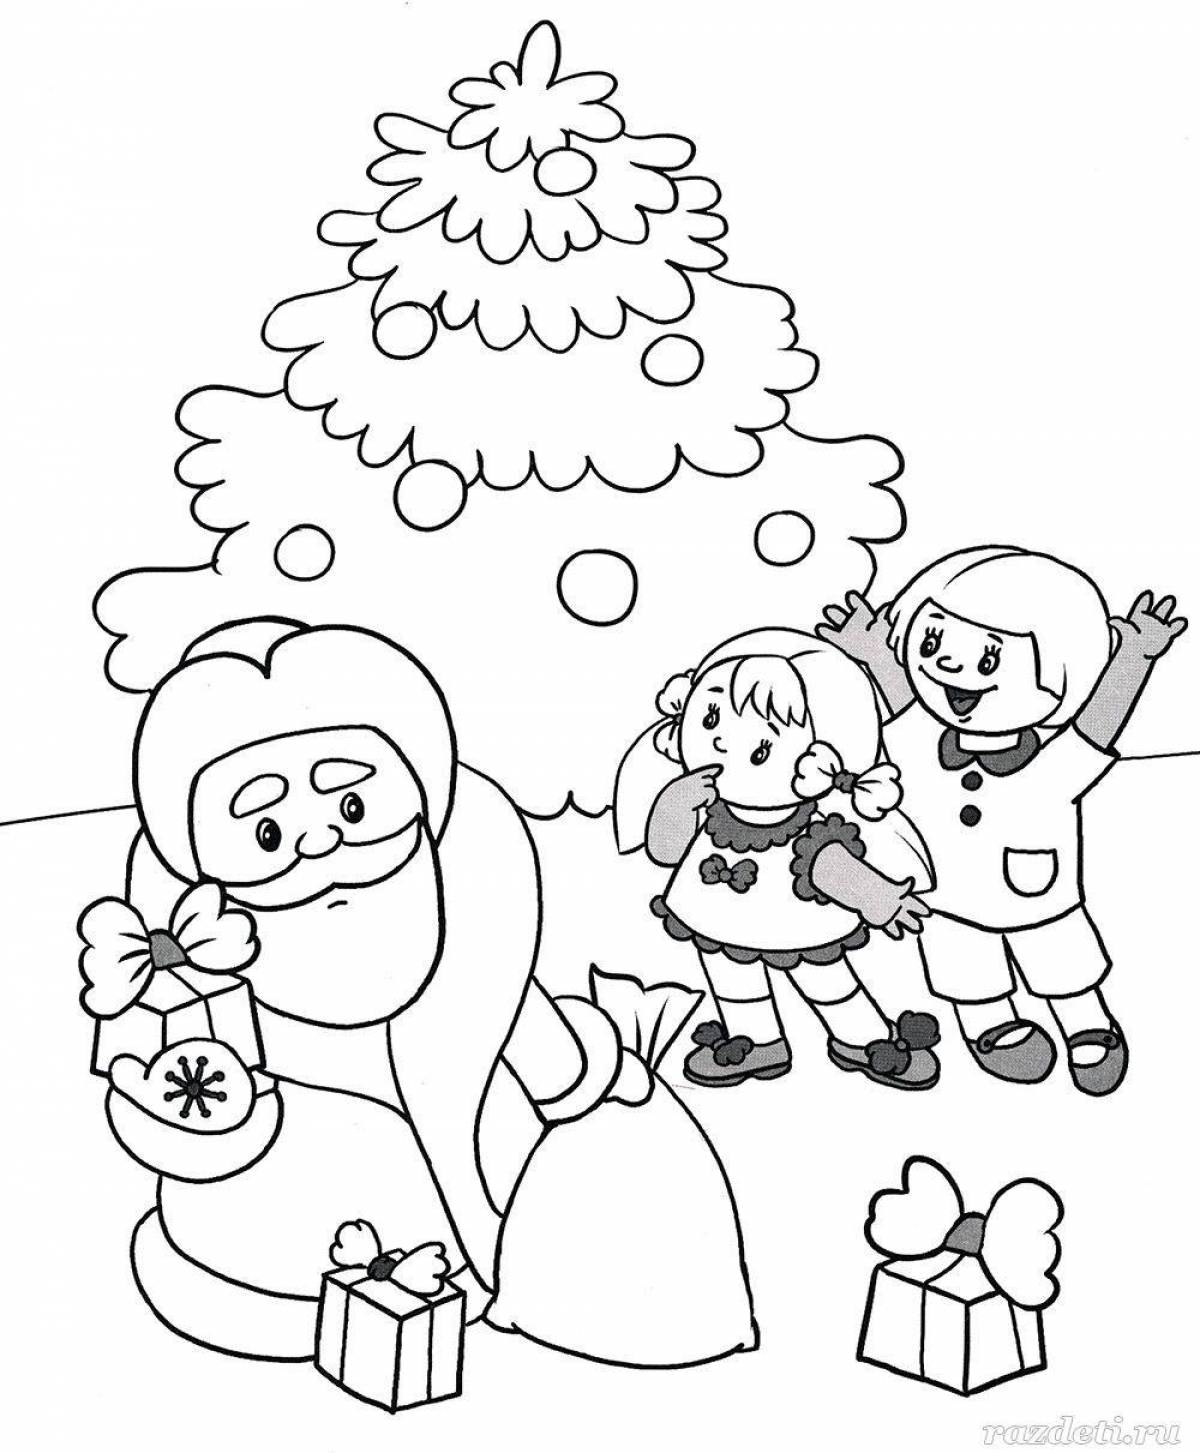 Fantastic winter coloring book for children 5-6 years old